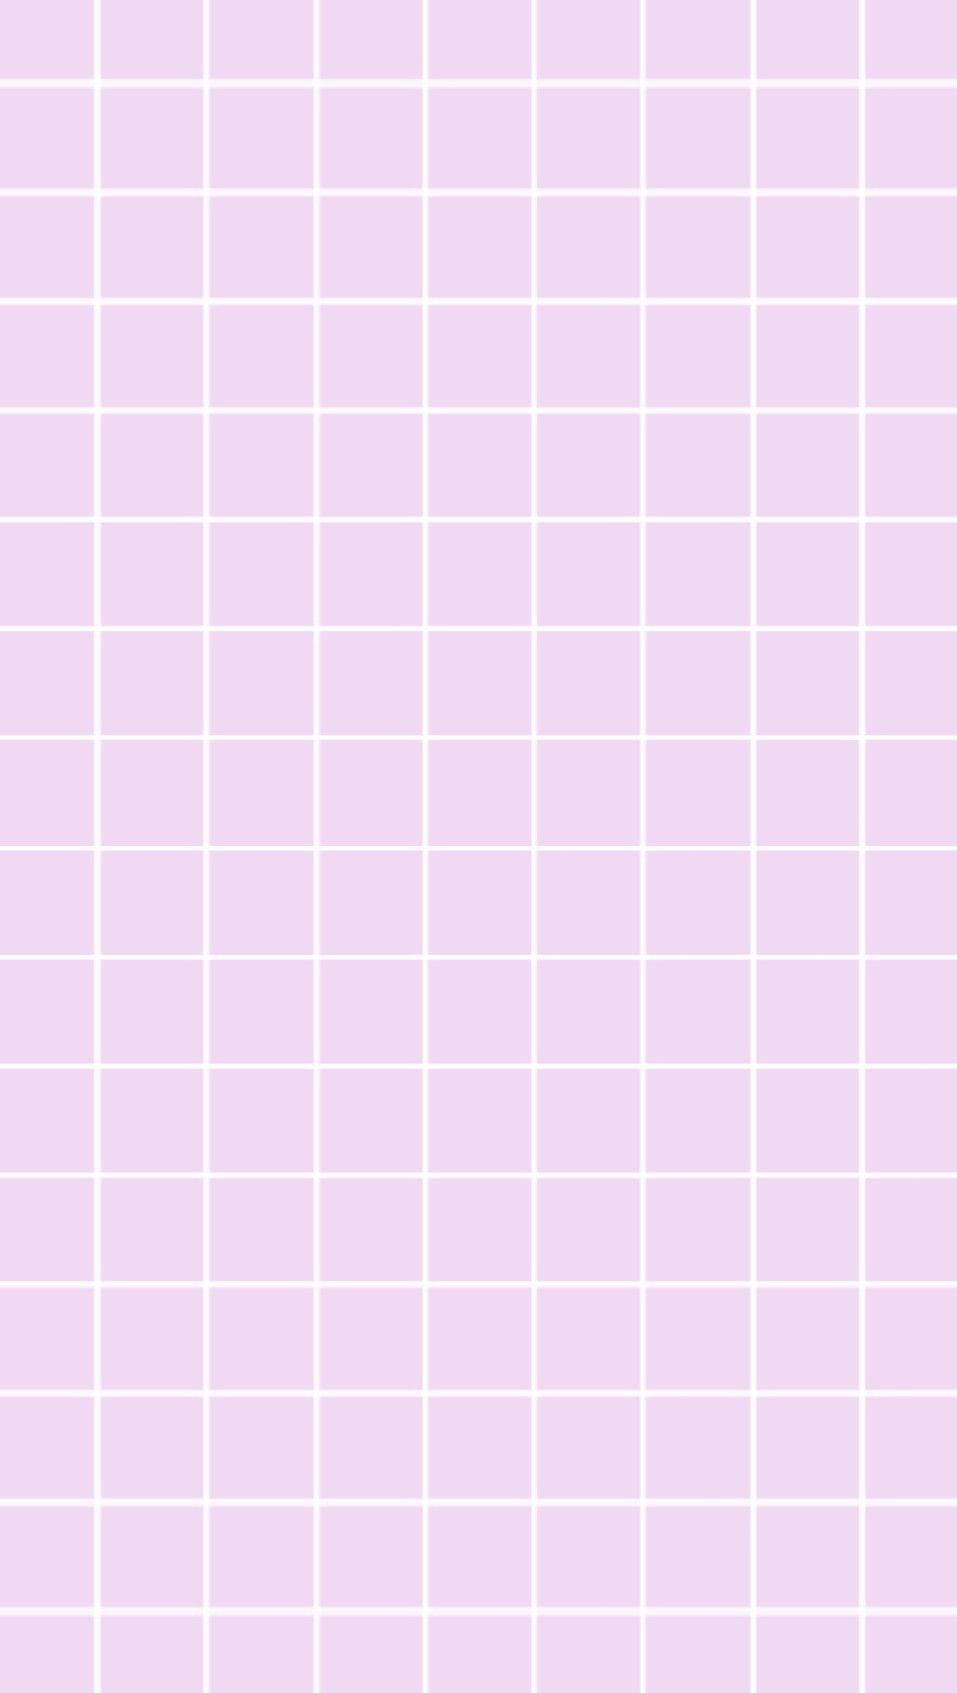 Simple Pink And White Grid Aesthetic Background